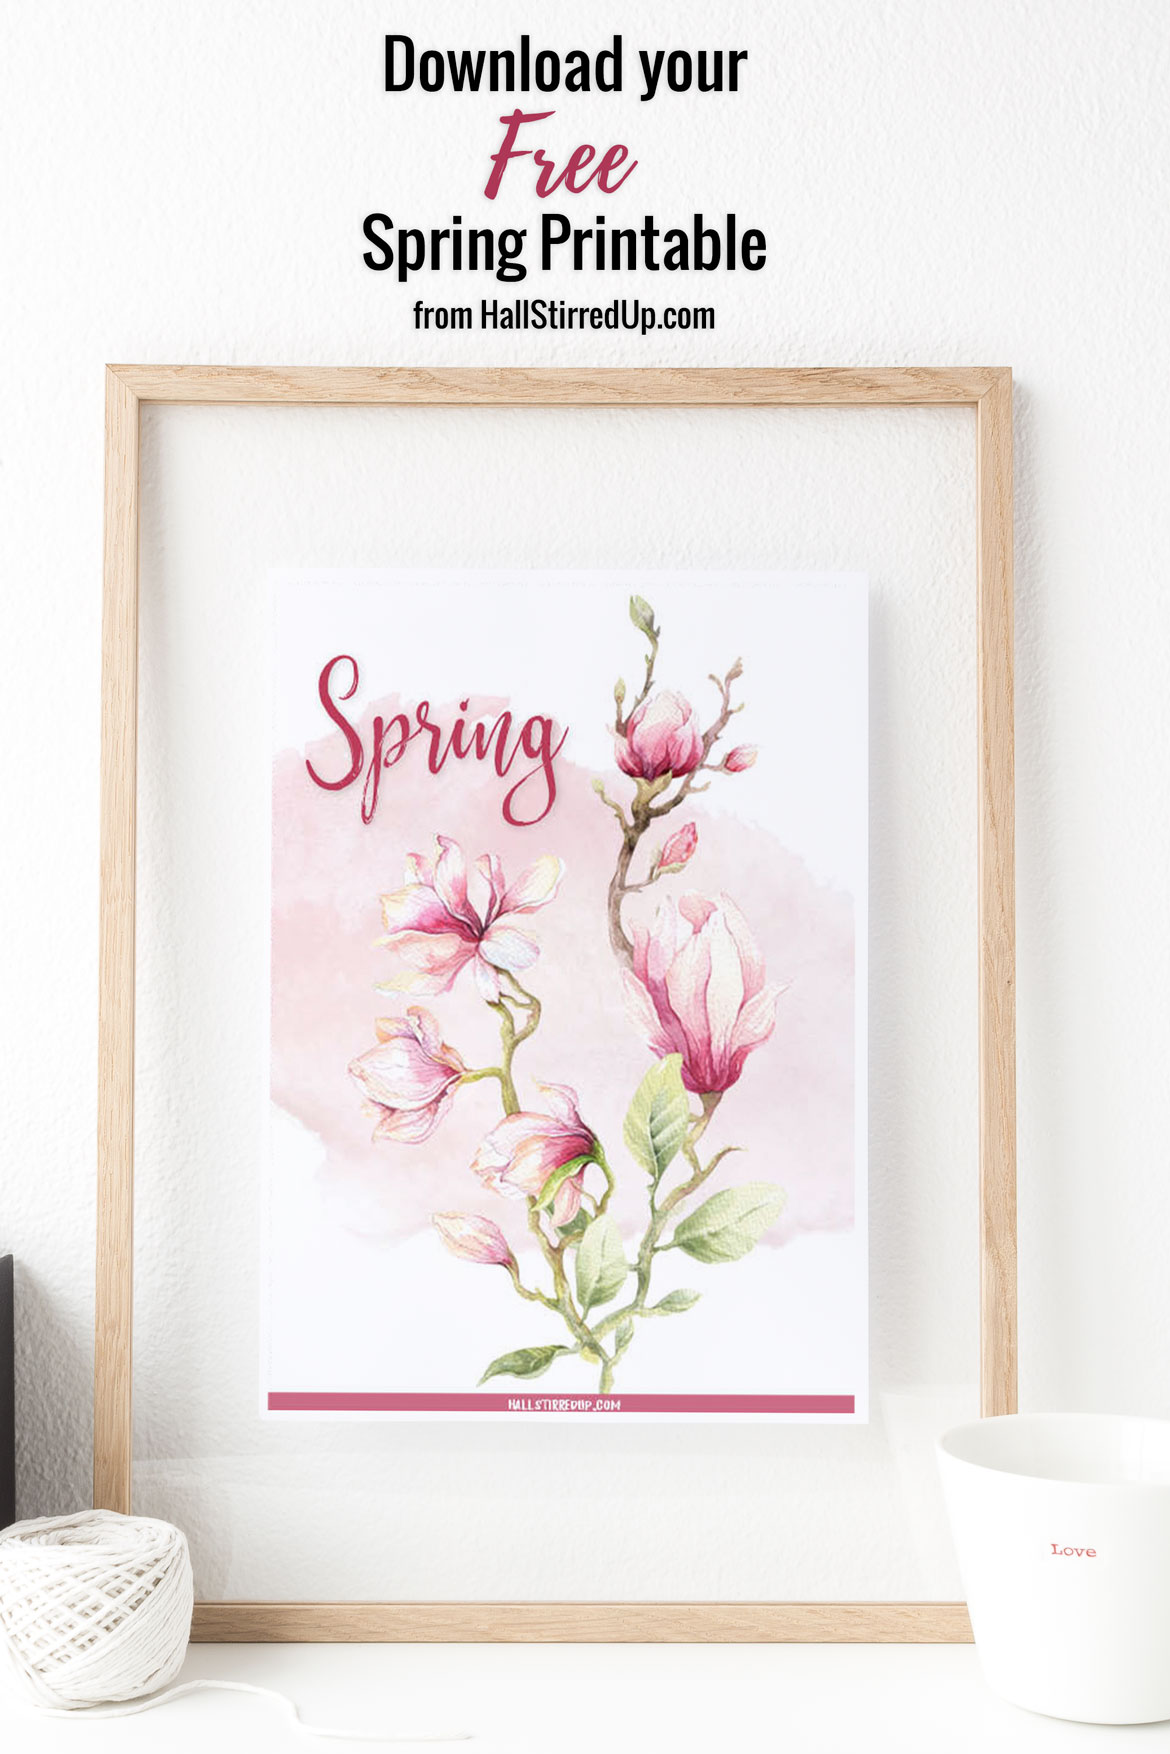 Spring beginnings include a pretty free printable